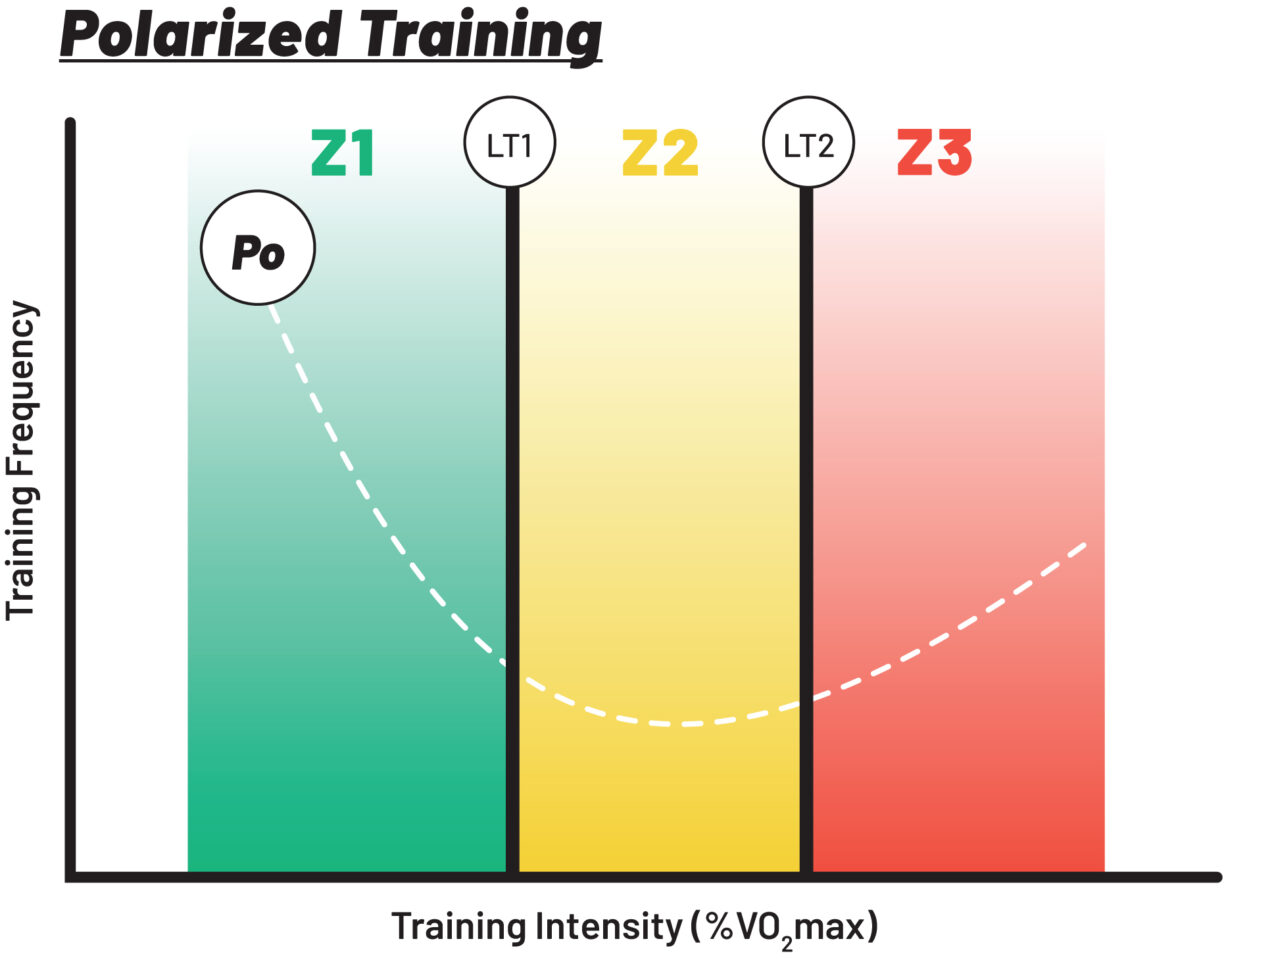 graphic showing intensity distribution of polarized training